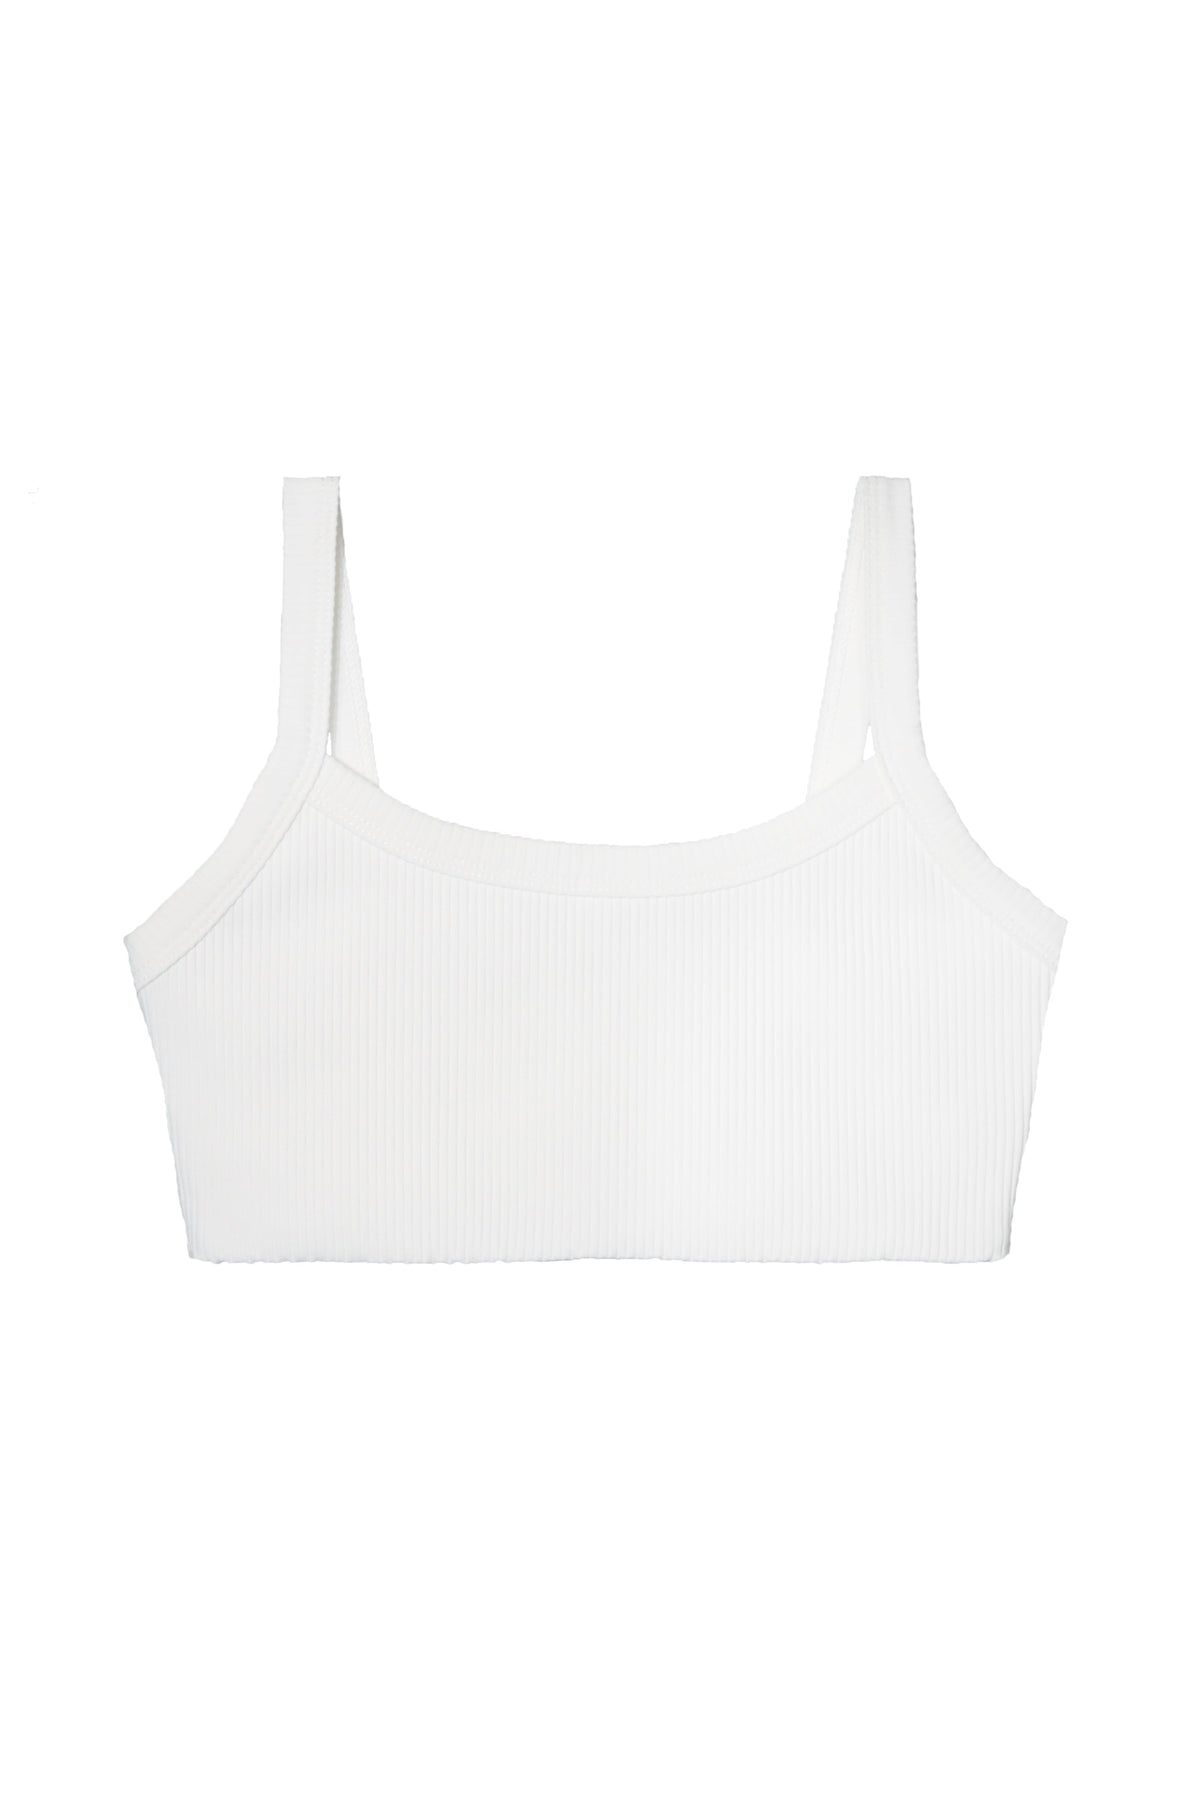 Year of Ours Activewear White / S Ribbed 2.0 Bralette- White